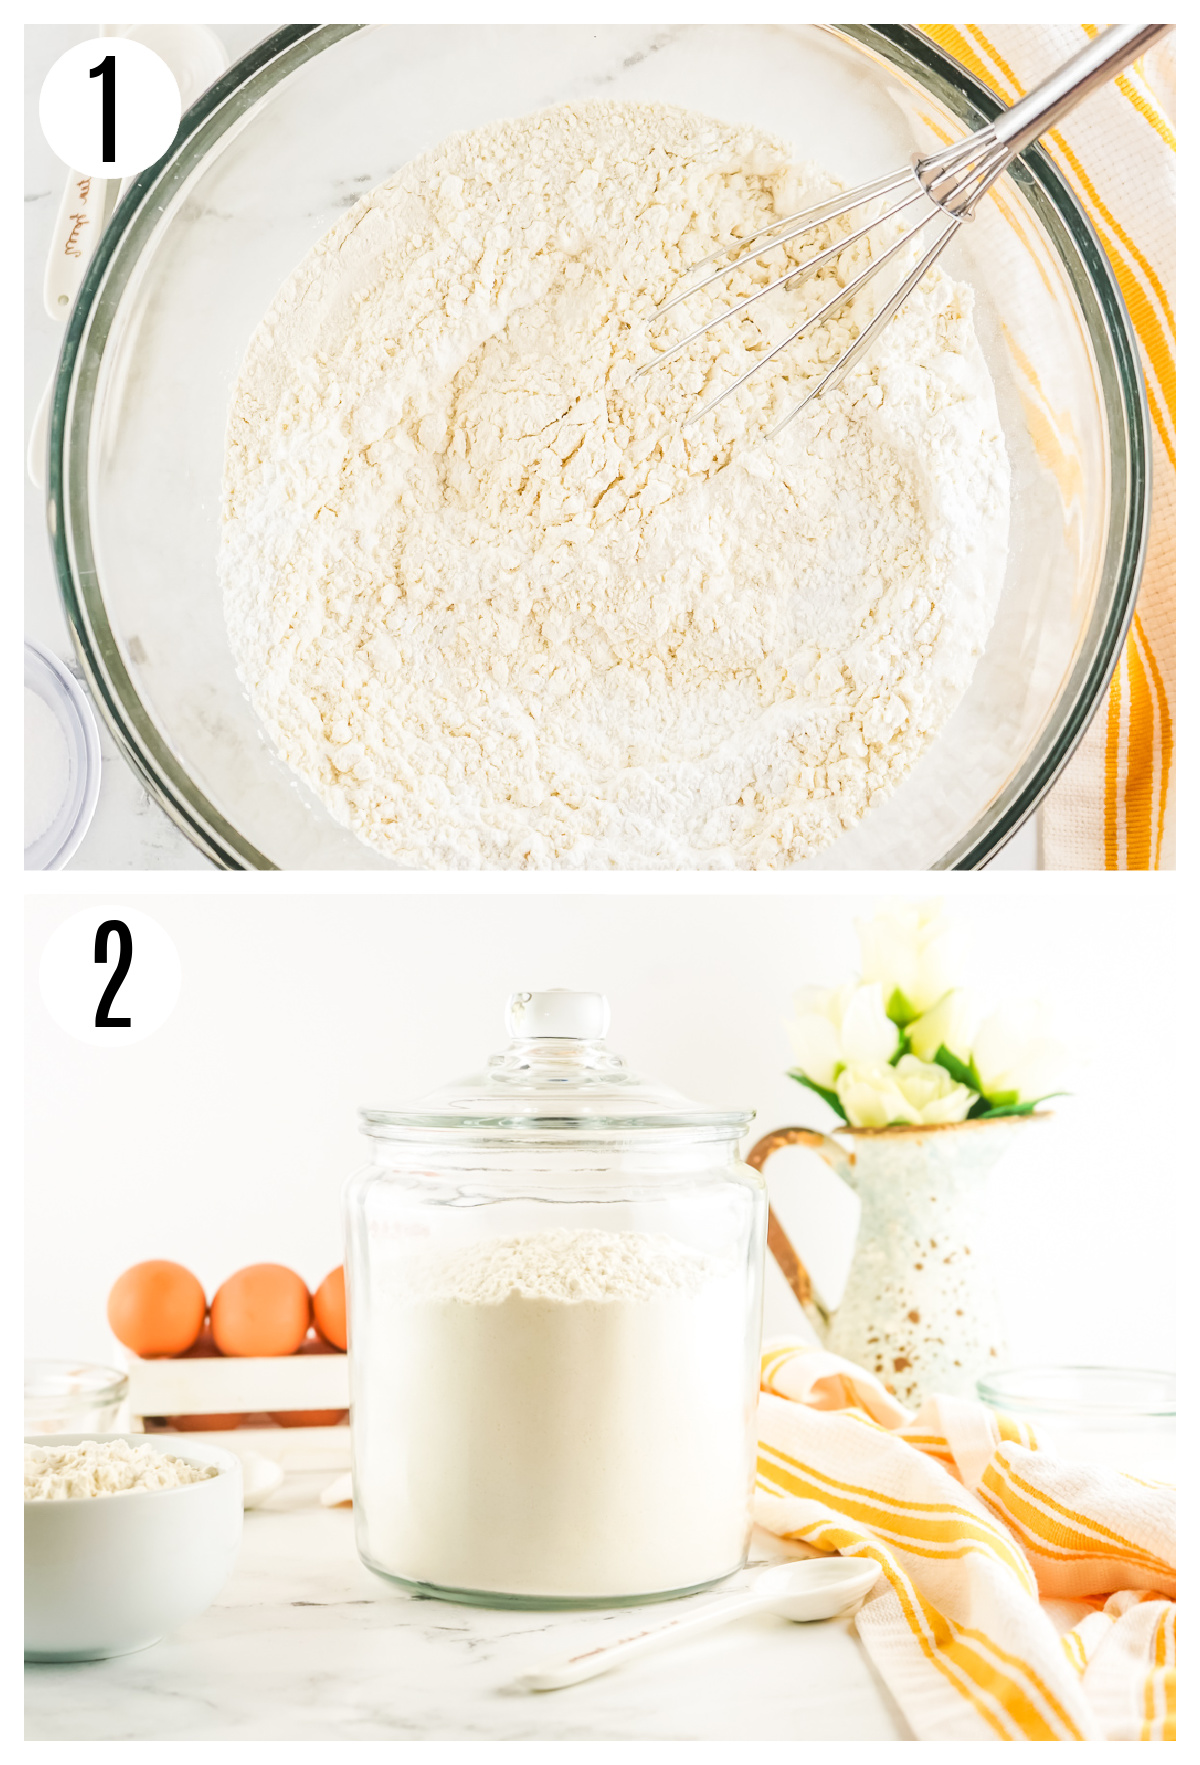 The step to make the bulk pancake mix include combining all the dry ingredients in a large mixing bowl and then storing it in an airtight container.